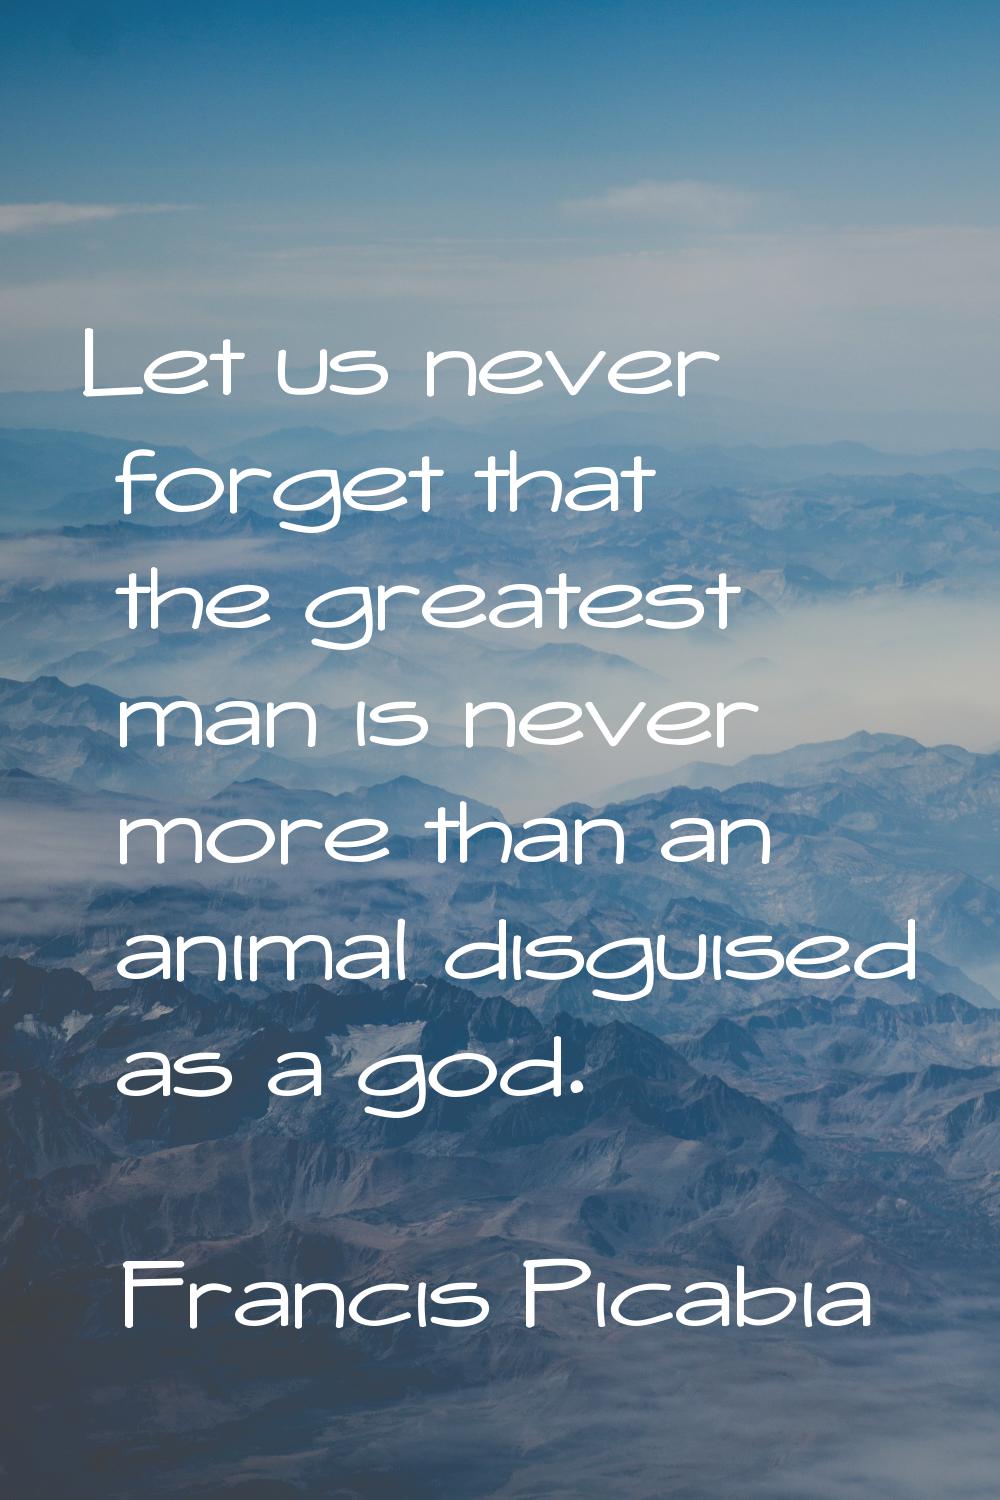 Let us never forget that the greatest man is never more than an animal disguised as a god.